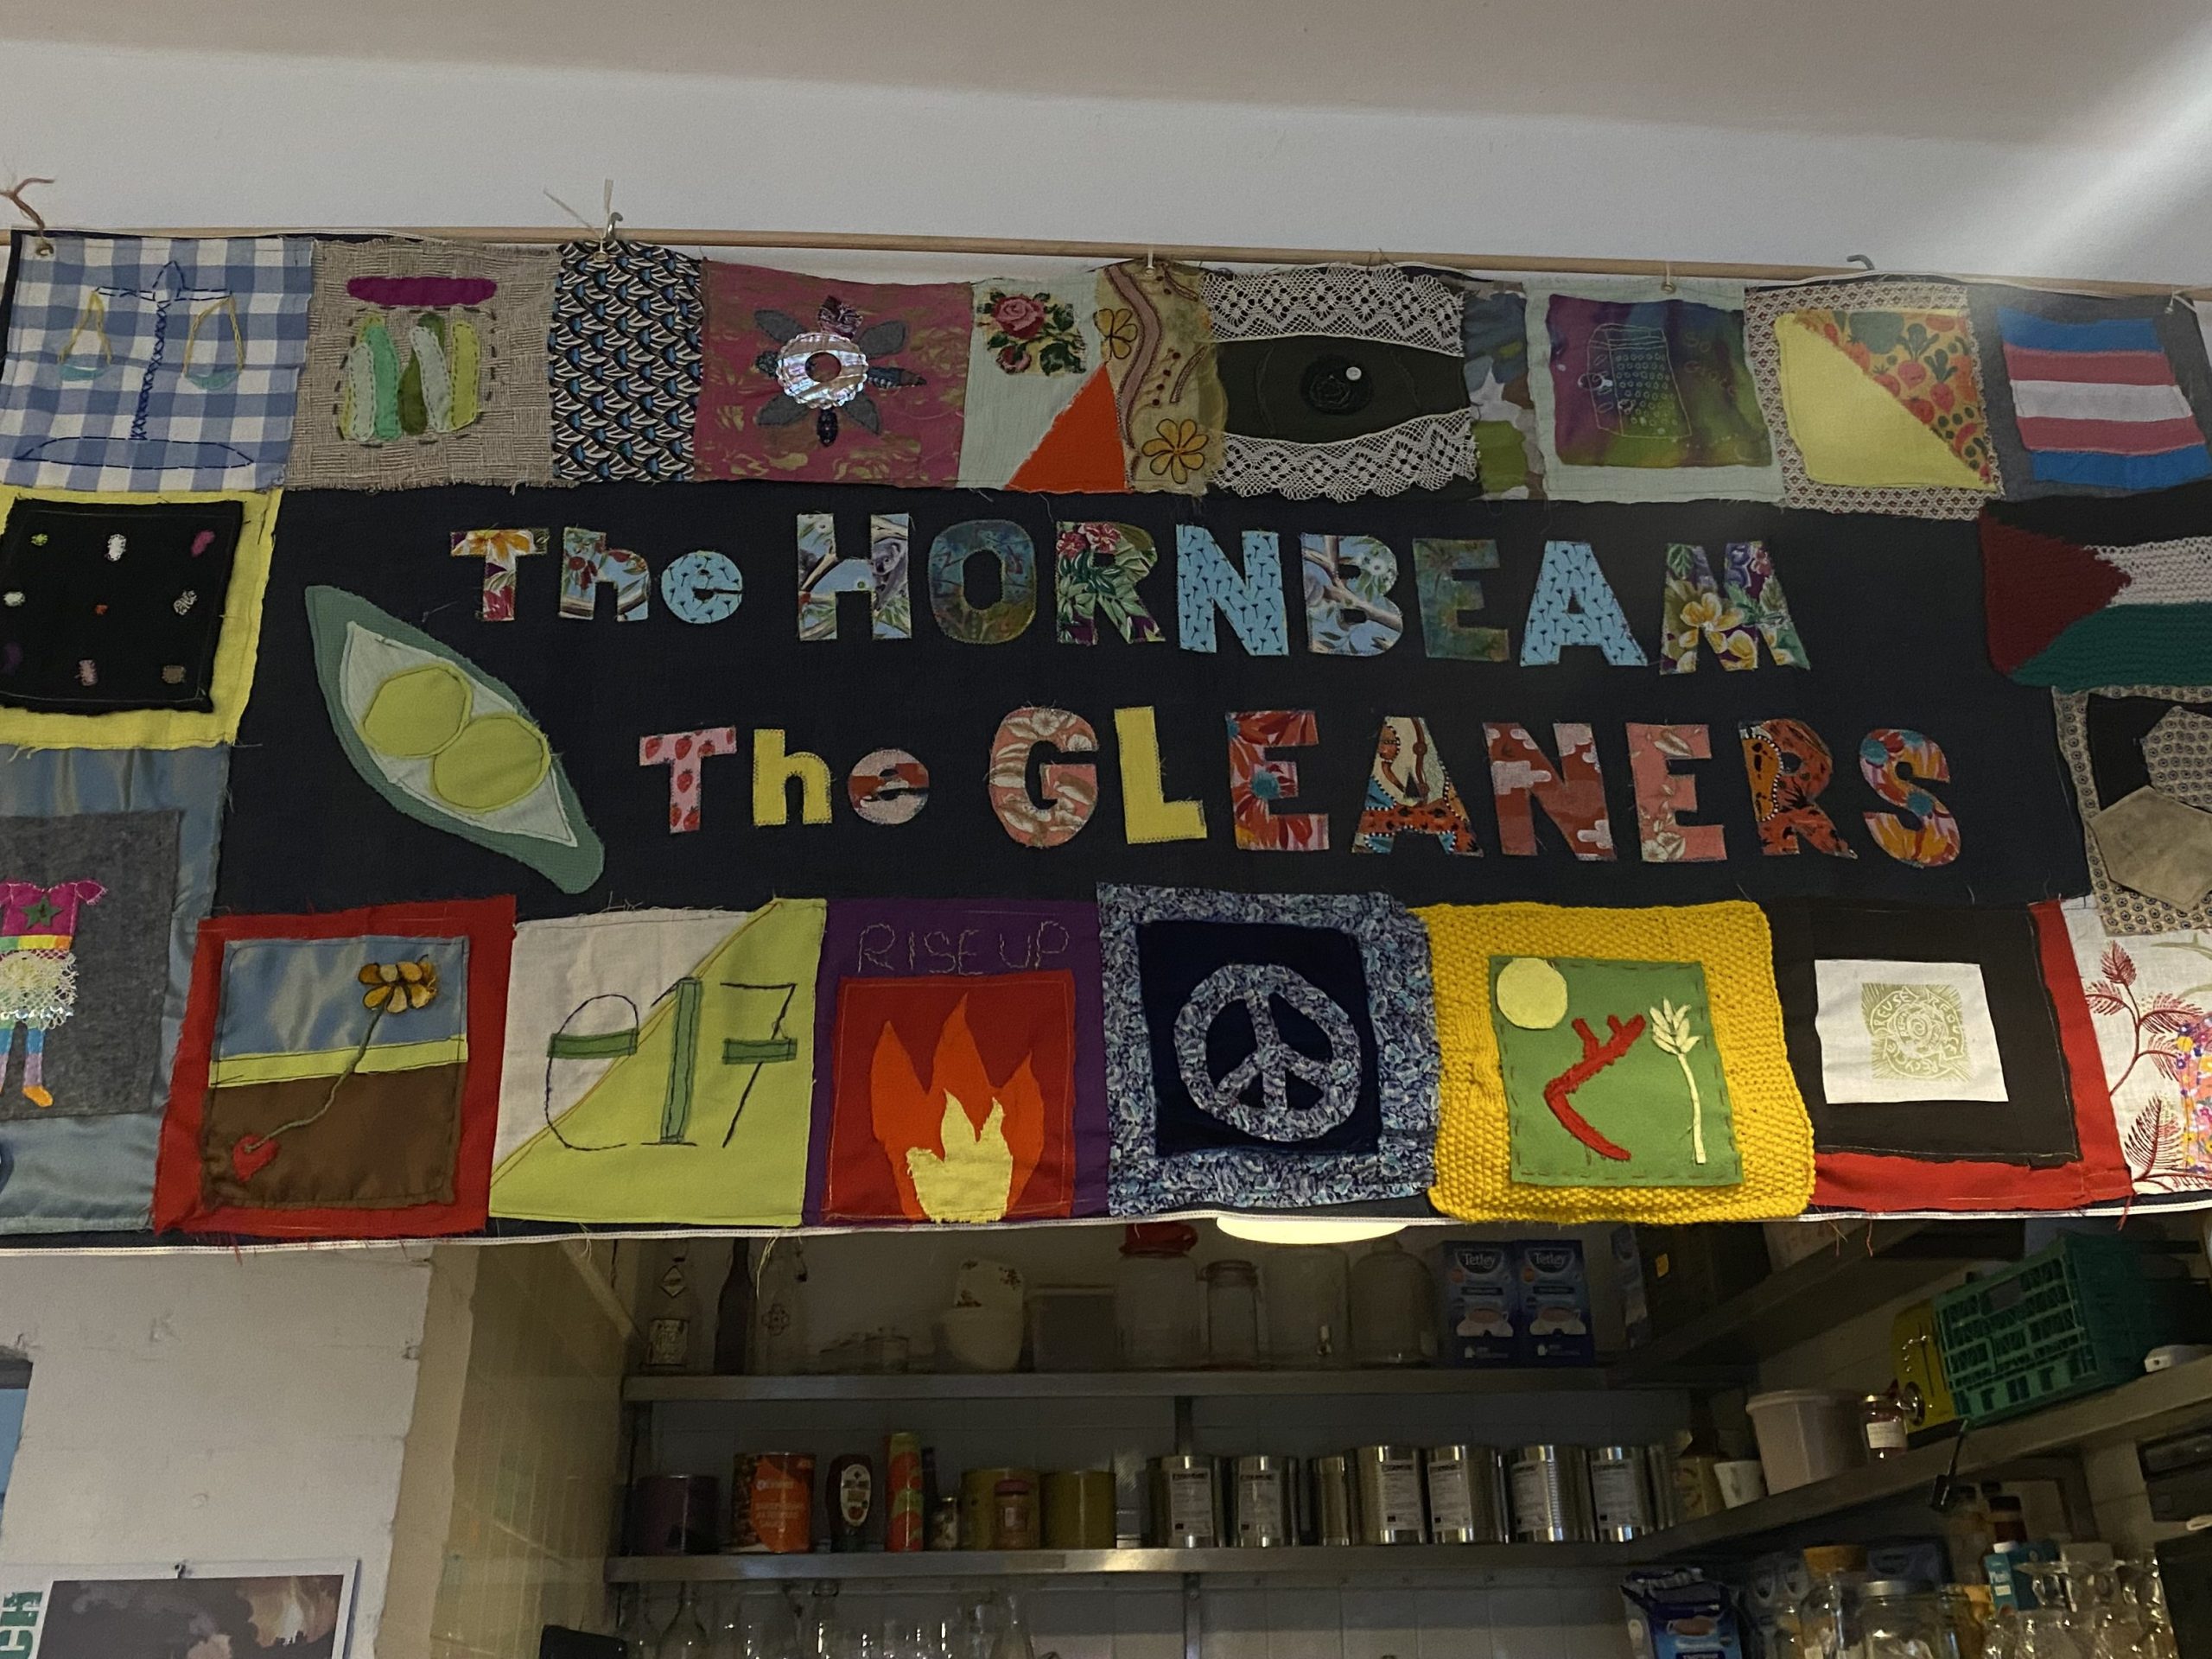 Quilt that hangs in the Gleaners Cafe.